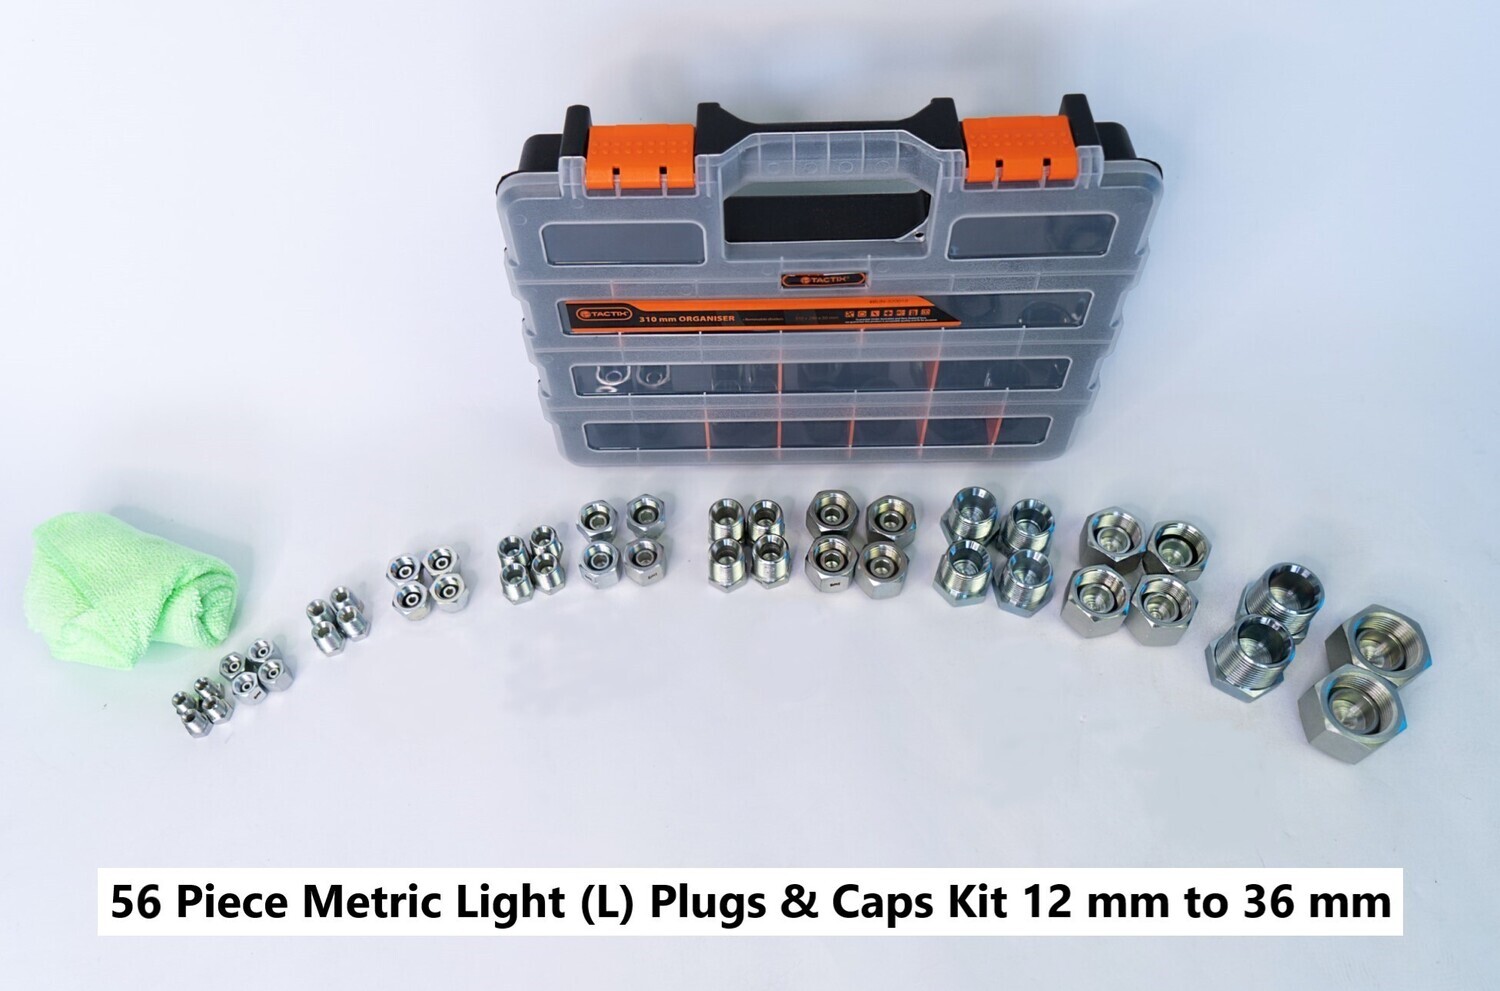 Chart Showing Layout and Quantities of Light (L) Metric Plugs and Caps in Plastic Case.  